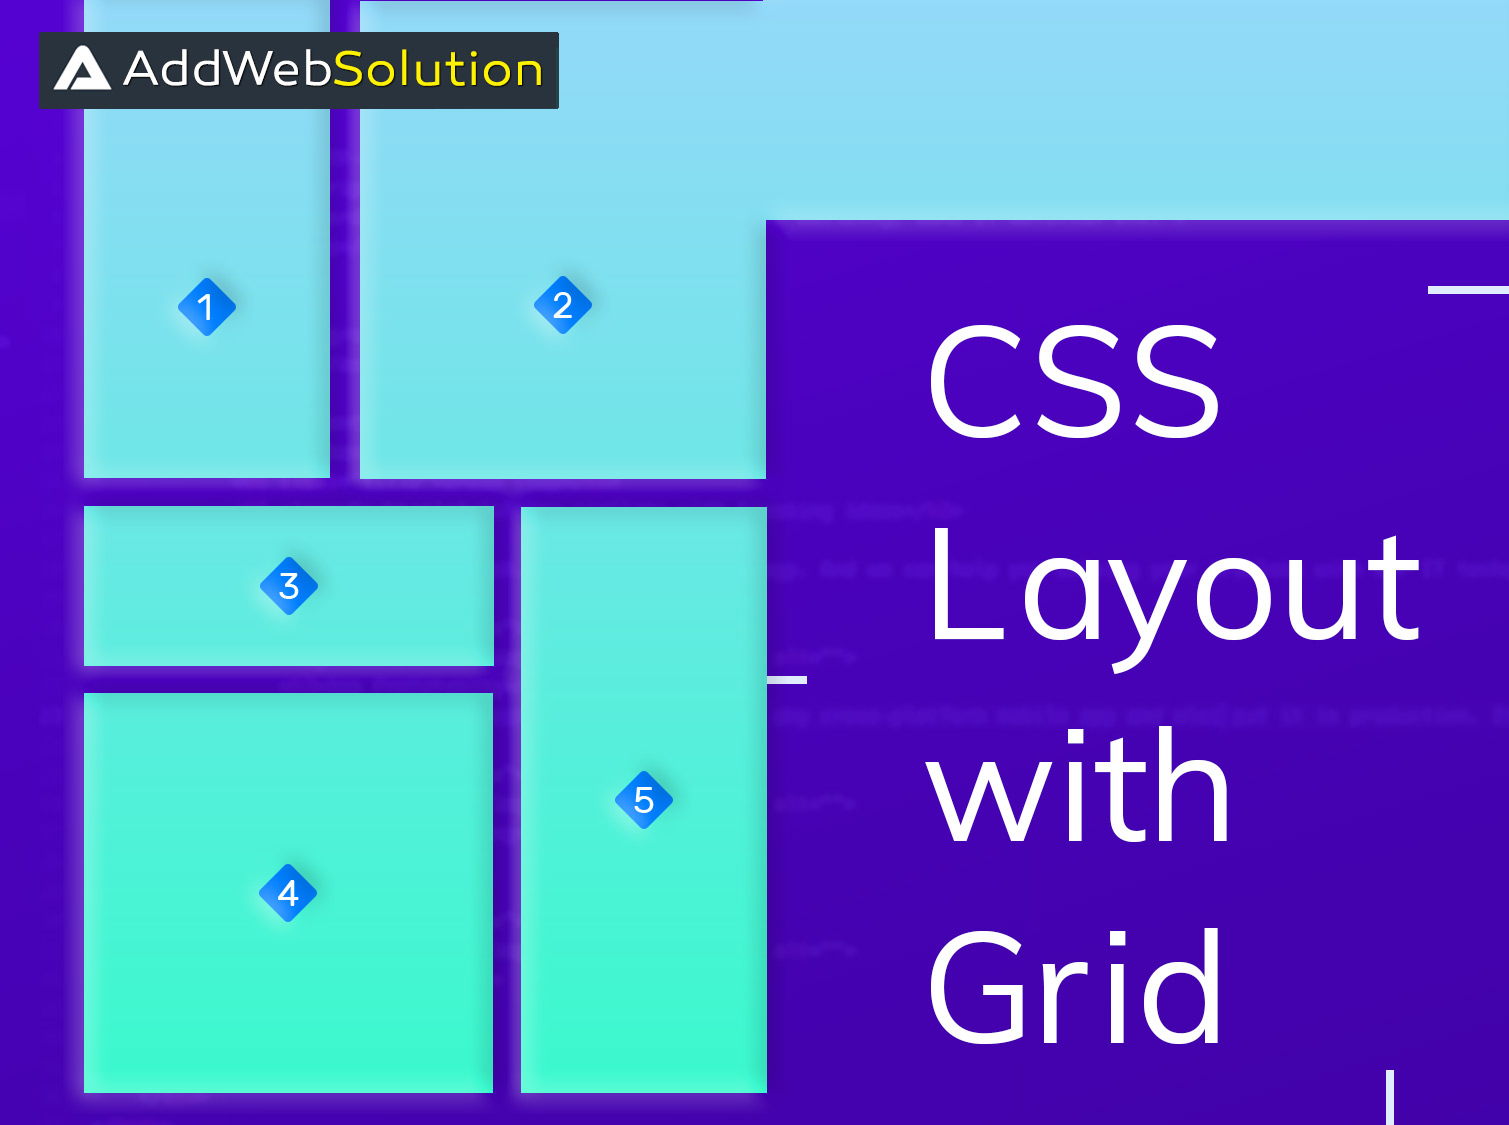 Learn about CSS Layout with Grid & its Techniques